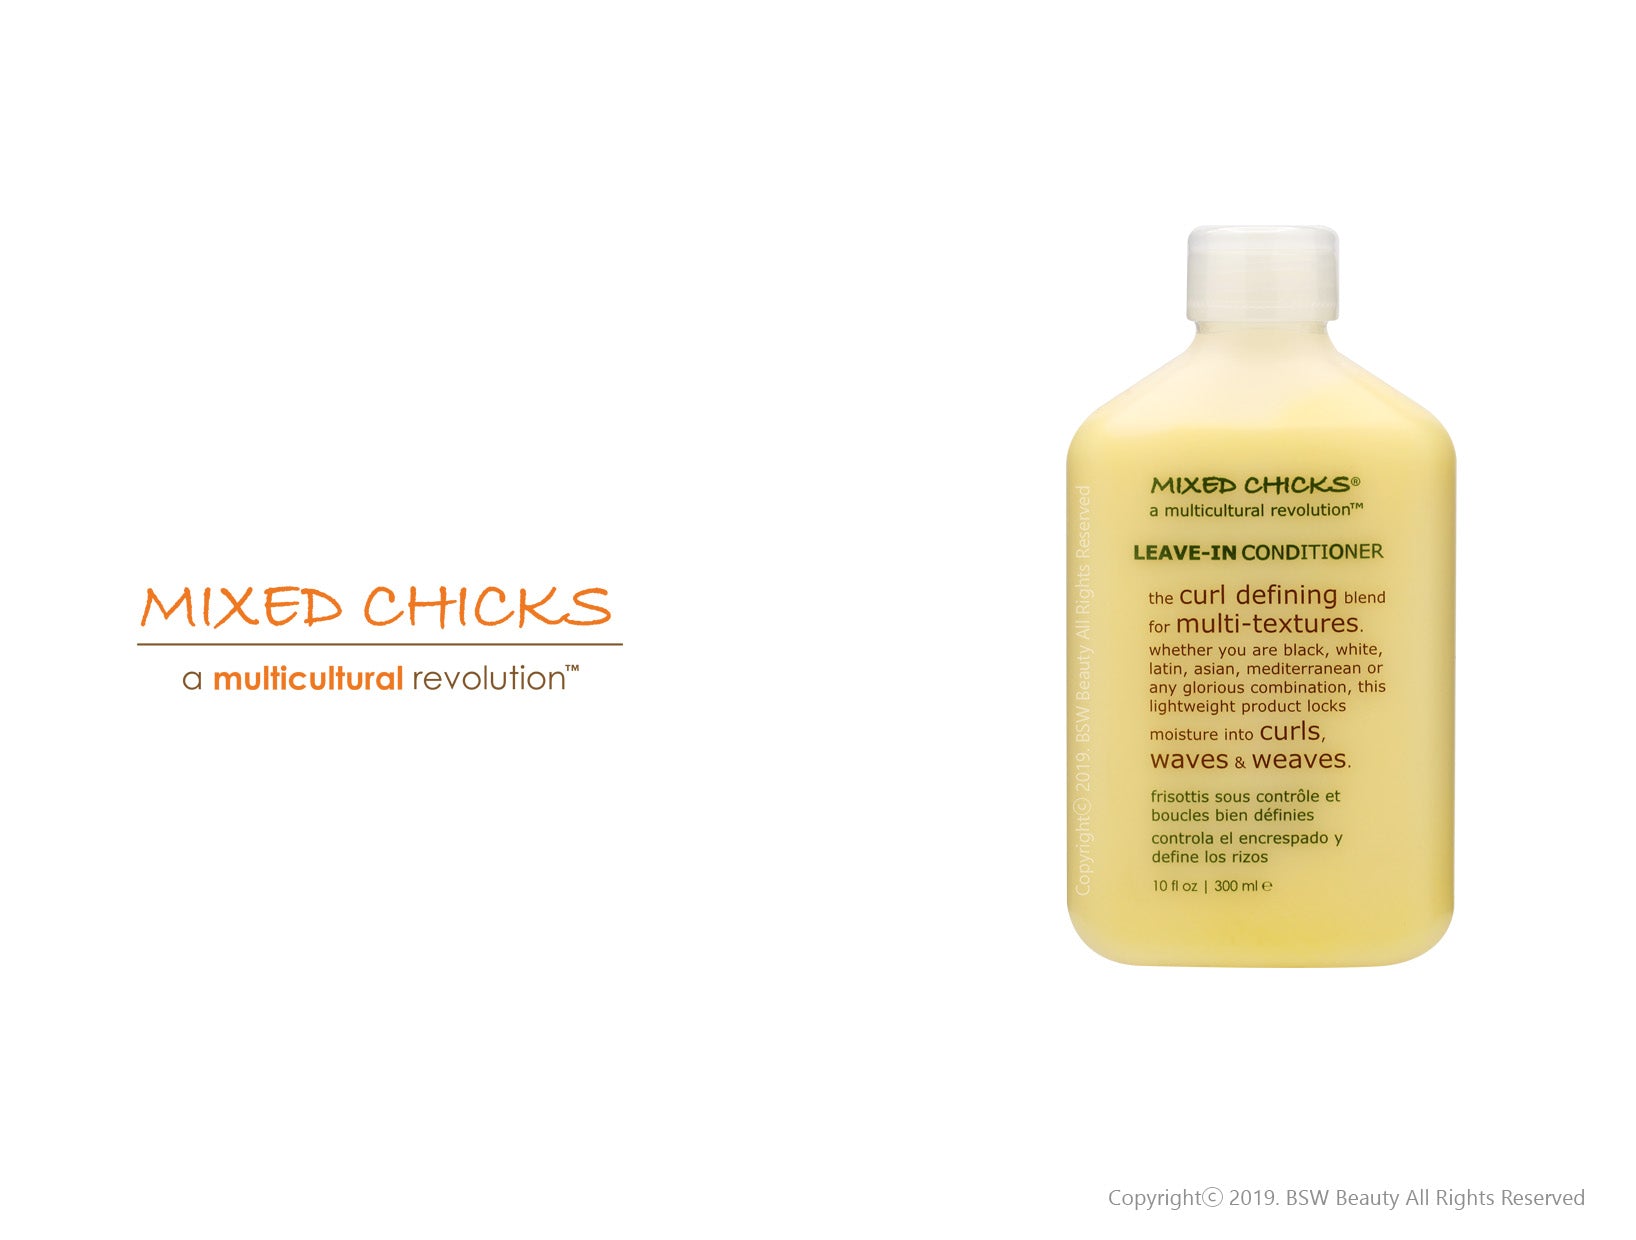 MIXED CHICKS LEAVE-IN CONDITIONER 10oz